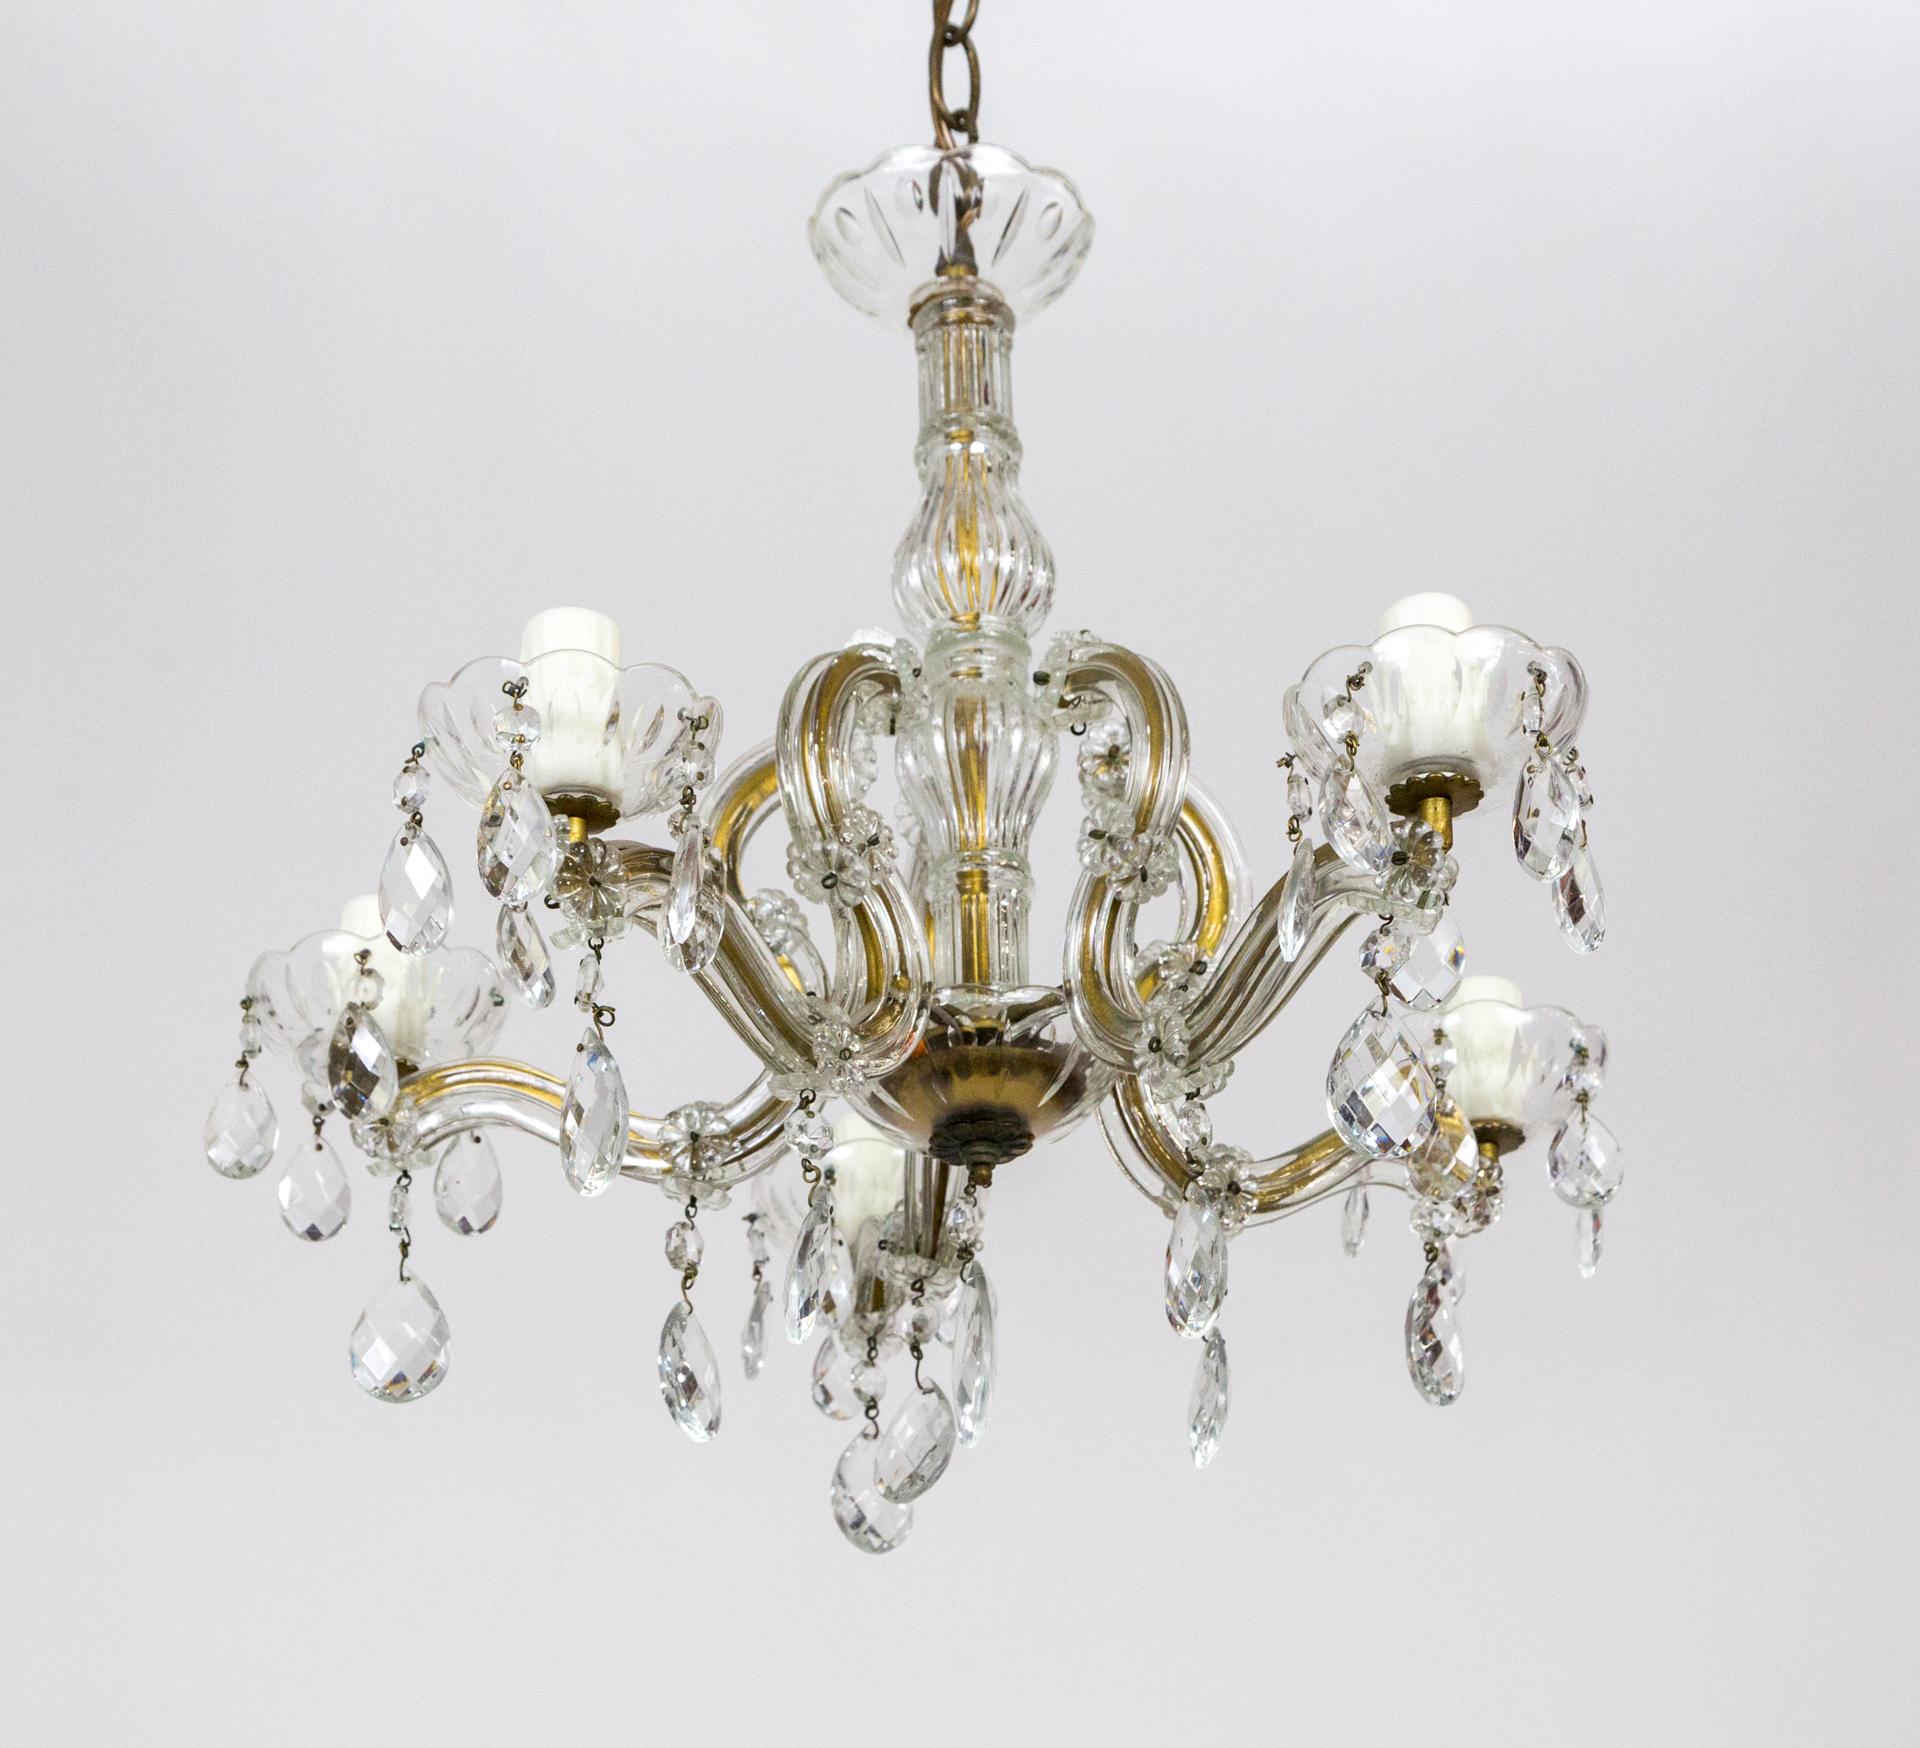 A modestly sized, 5-light chandelier in the Austrian, Maria Theresa style - a brass structure covered with crystal, molded glass. It has dangling cut almond crystals, rosette crystals adorning the arms, and new, poly-beeswax candle covers. New chain